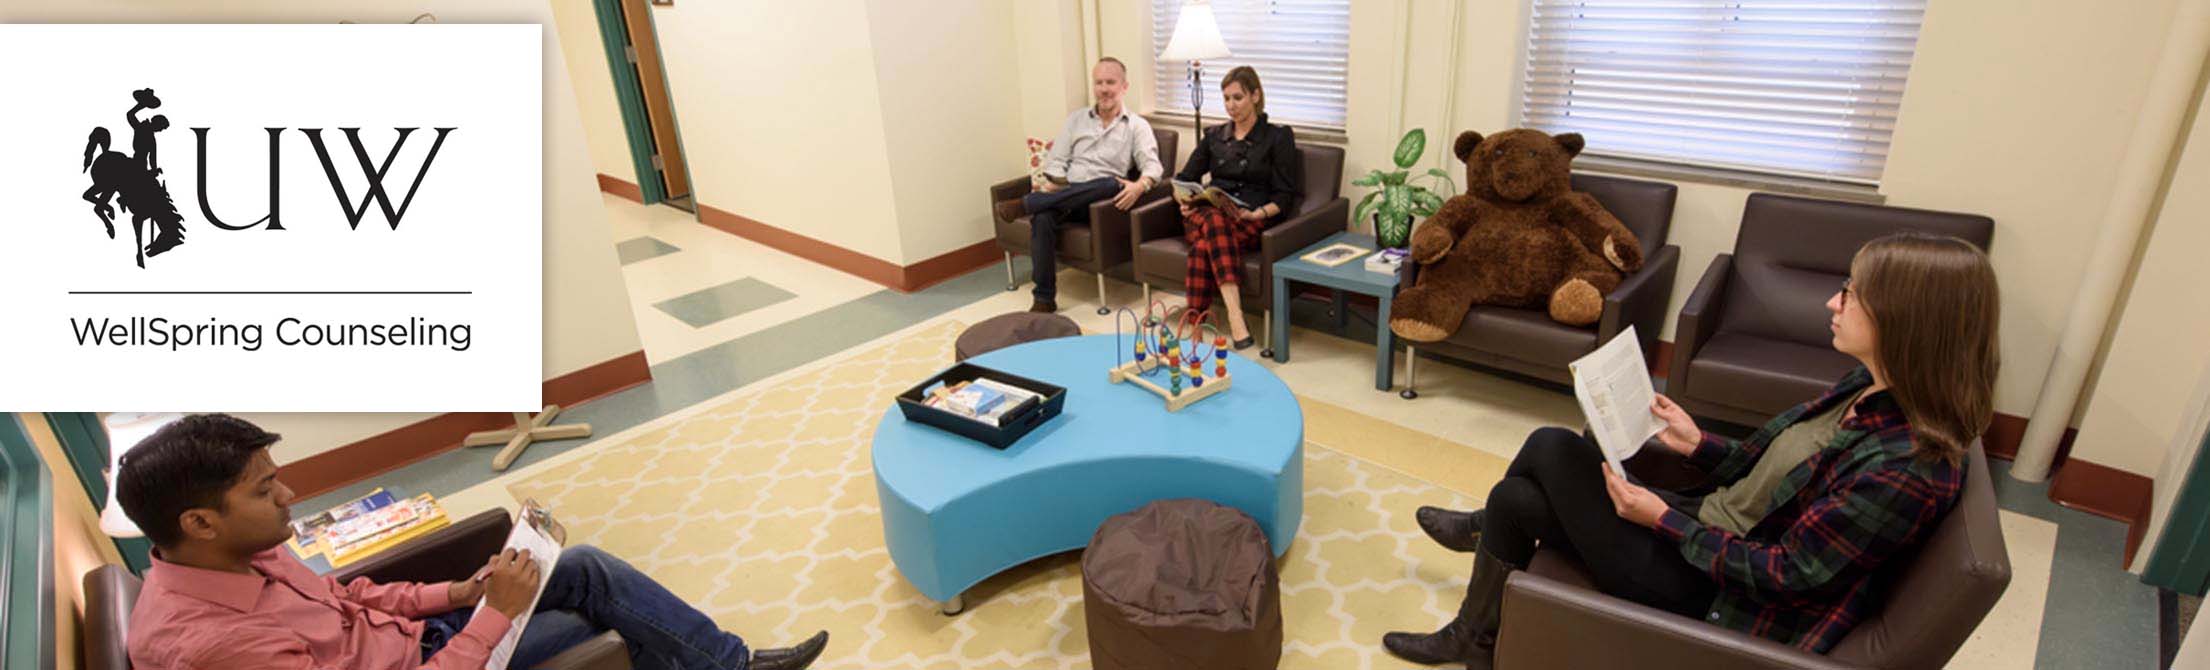 Free counseling services offered by University of Wyoming WellSpring Counseling Clinic